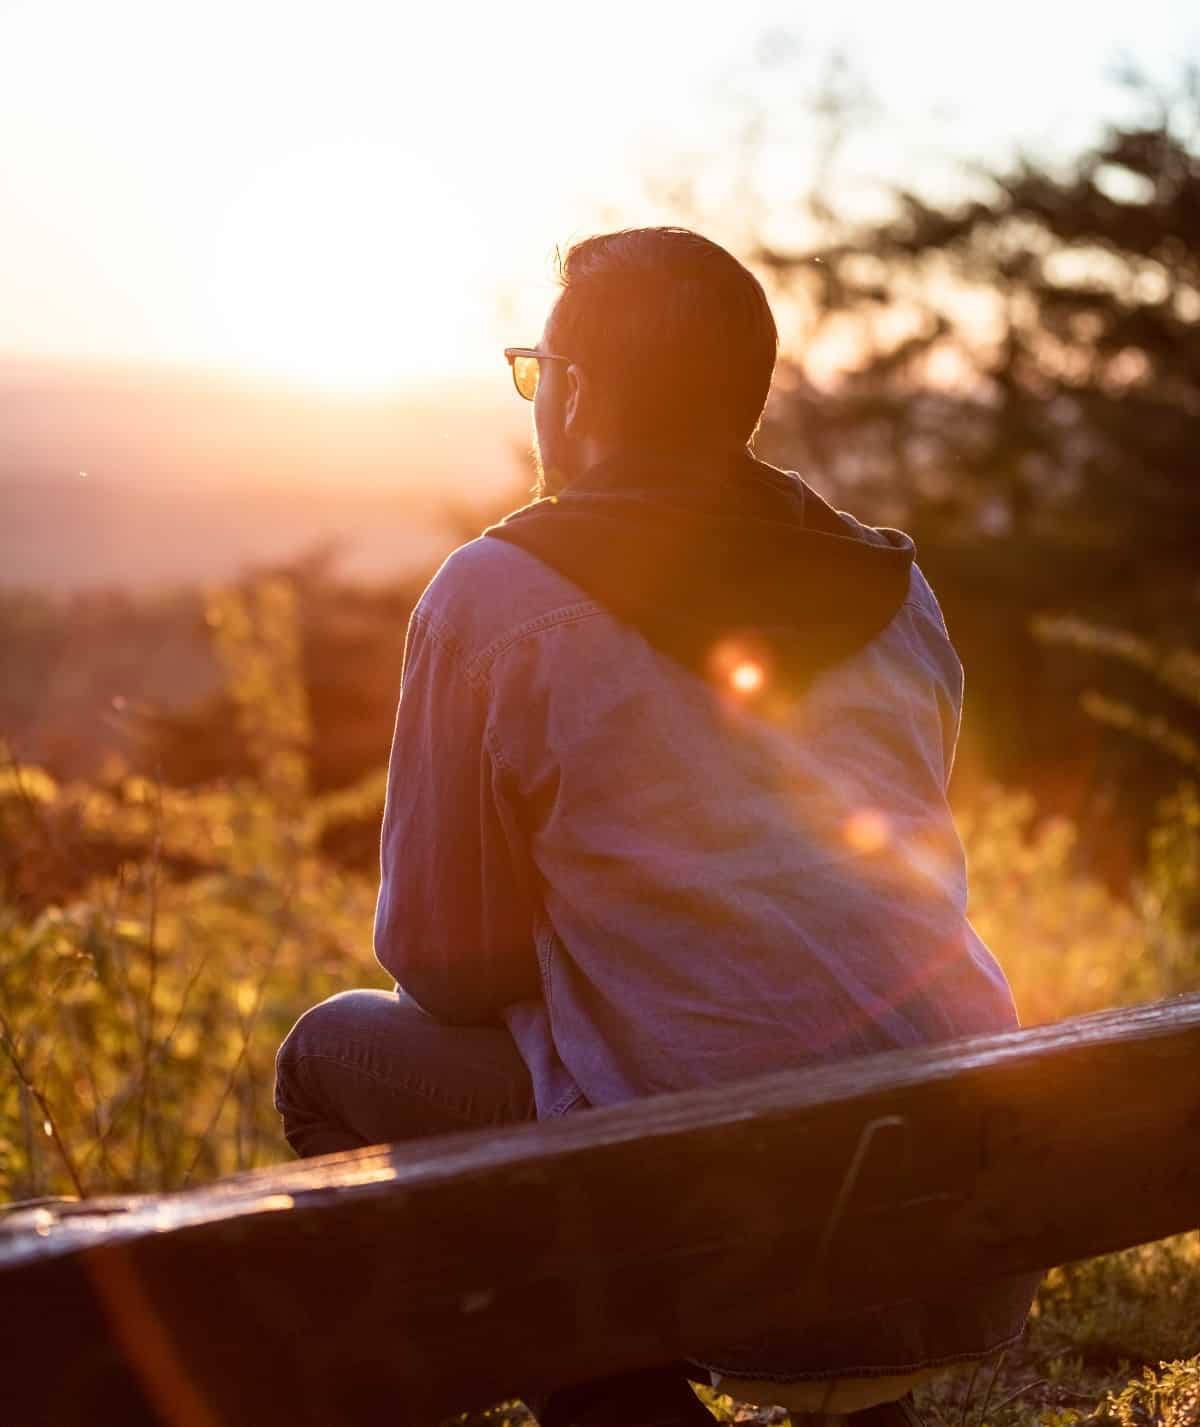 A man sitting on a bench at sunset.